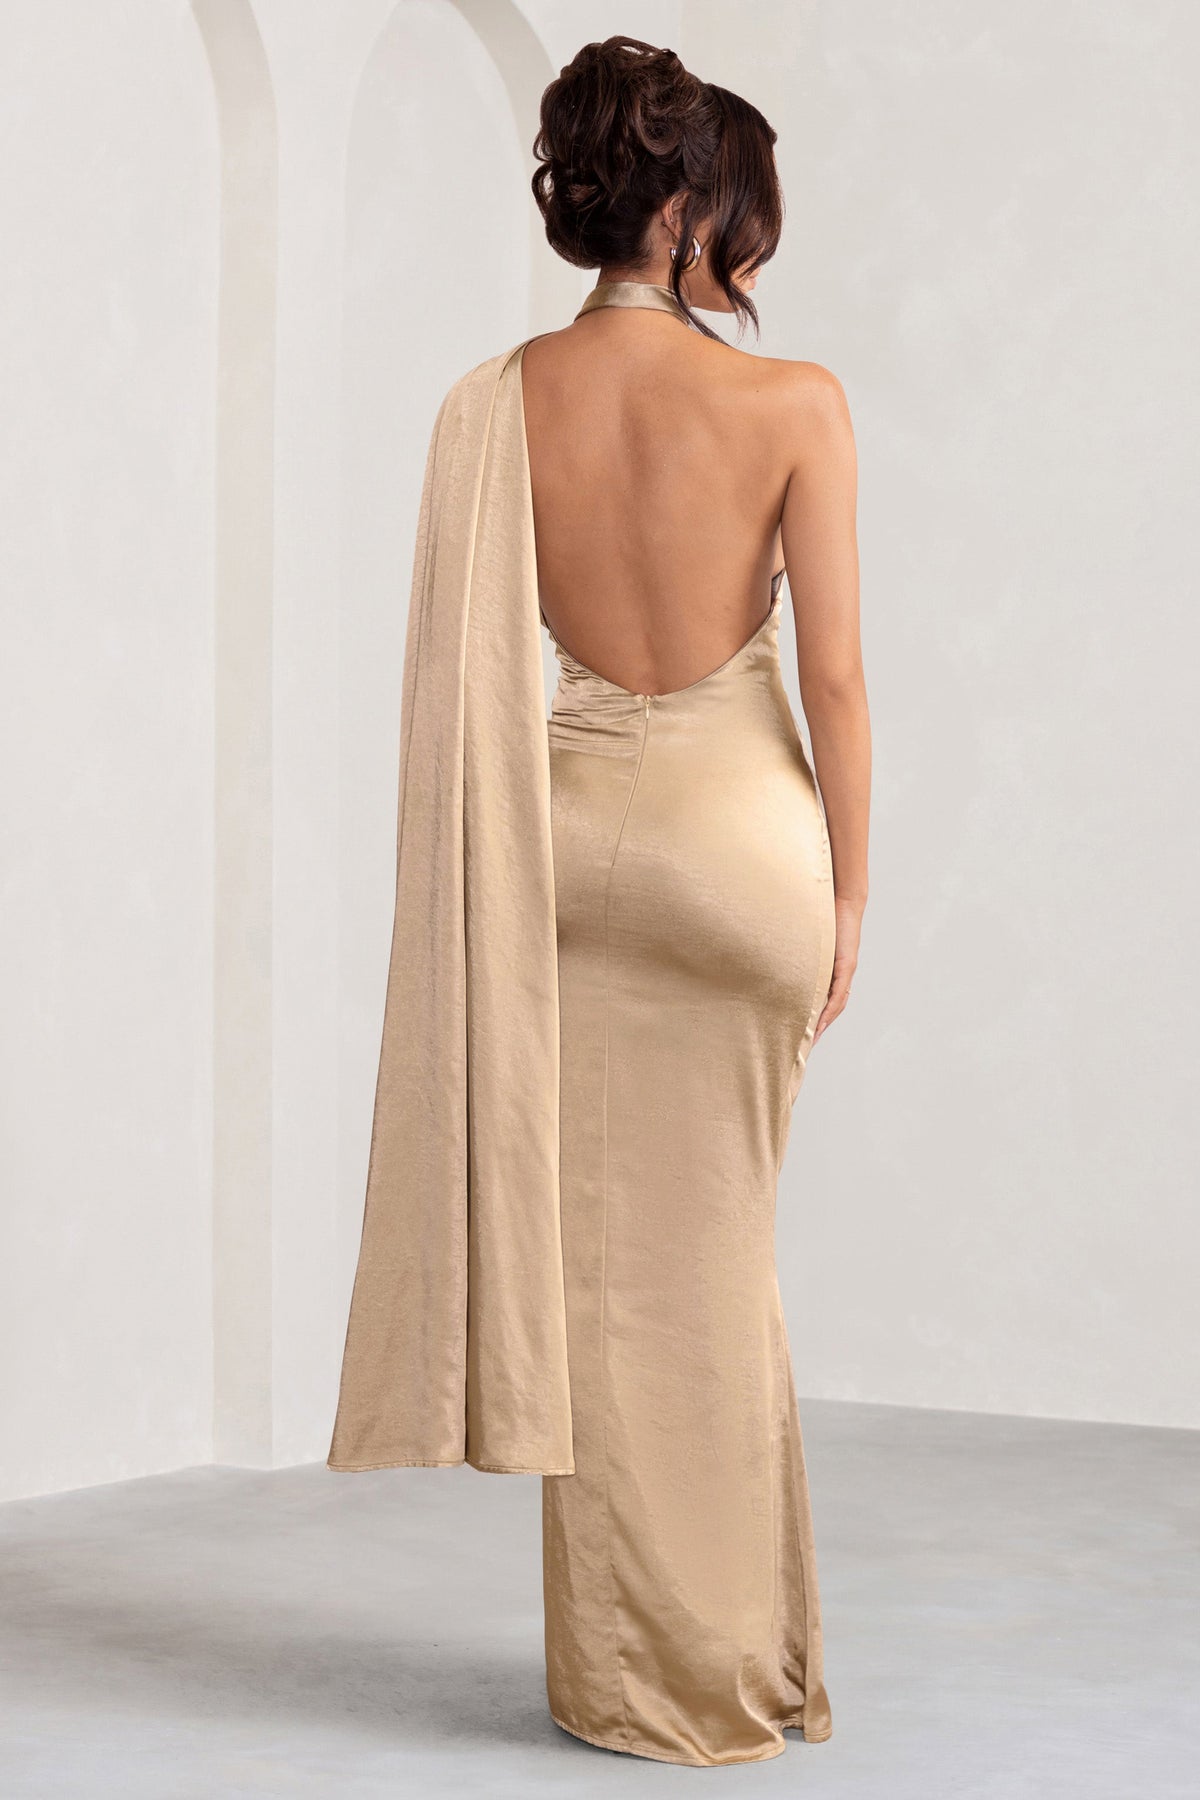 French Backless Push Up Satin Camisole Dress